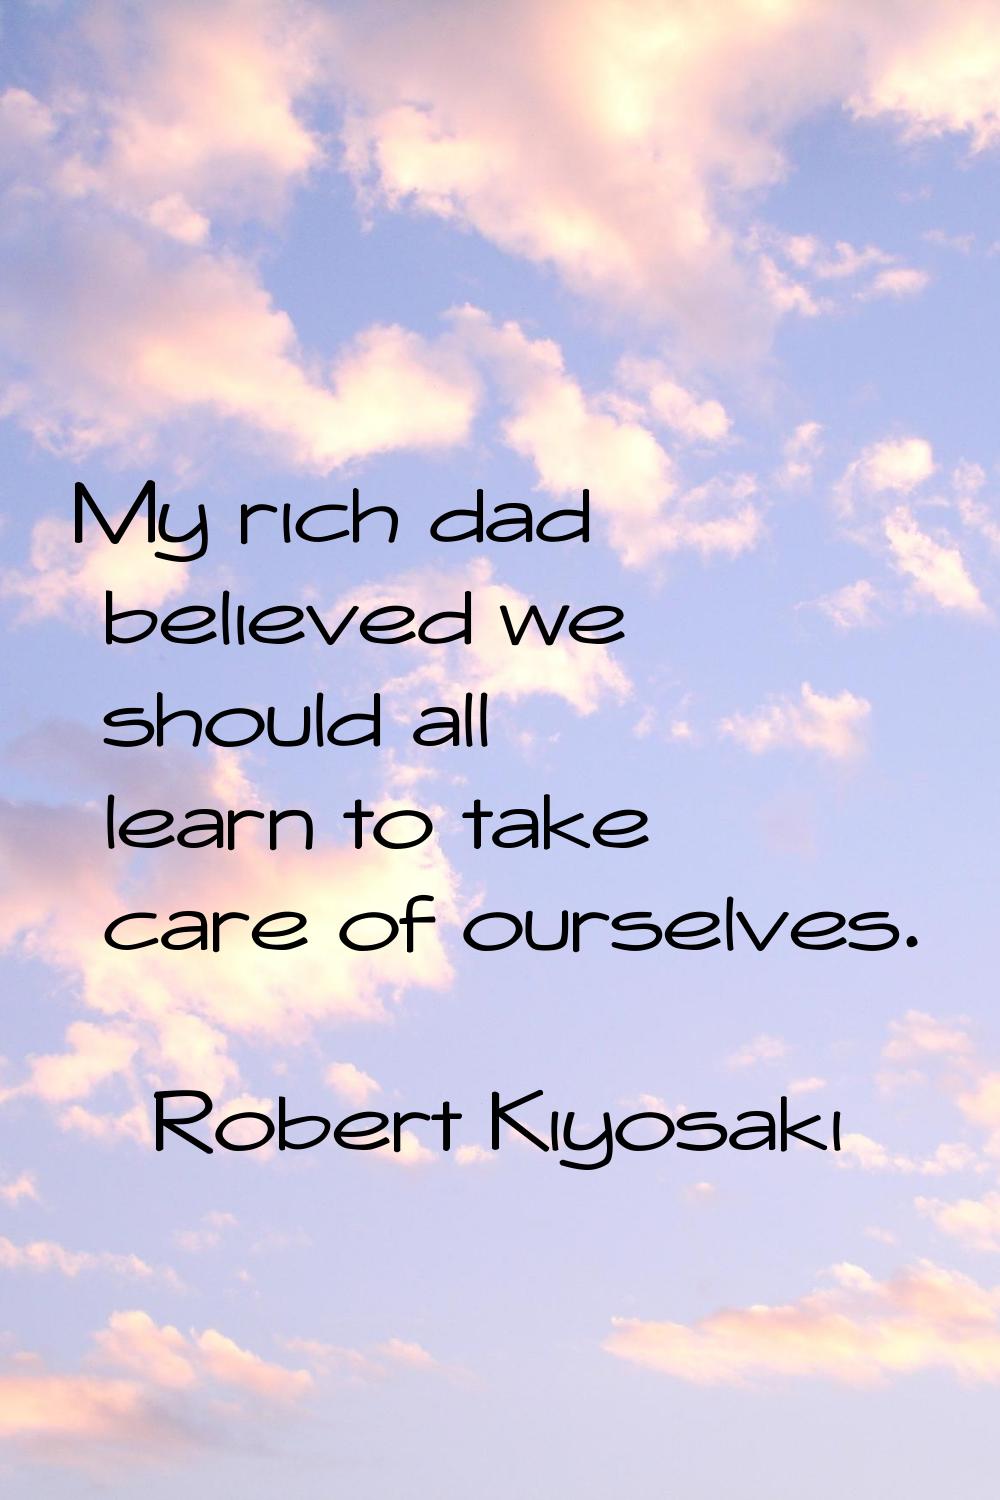 My rich dad believed we should all learn to take care of ourselves.